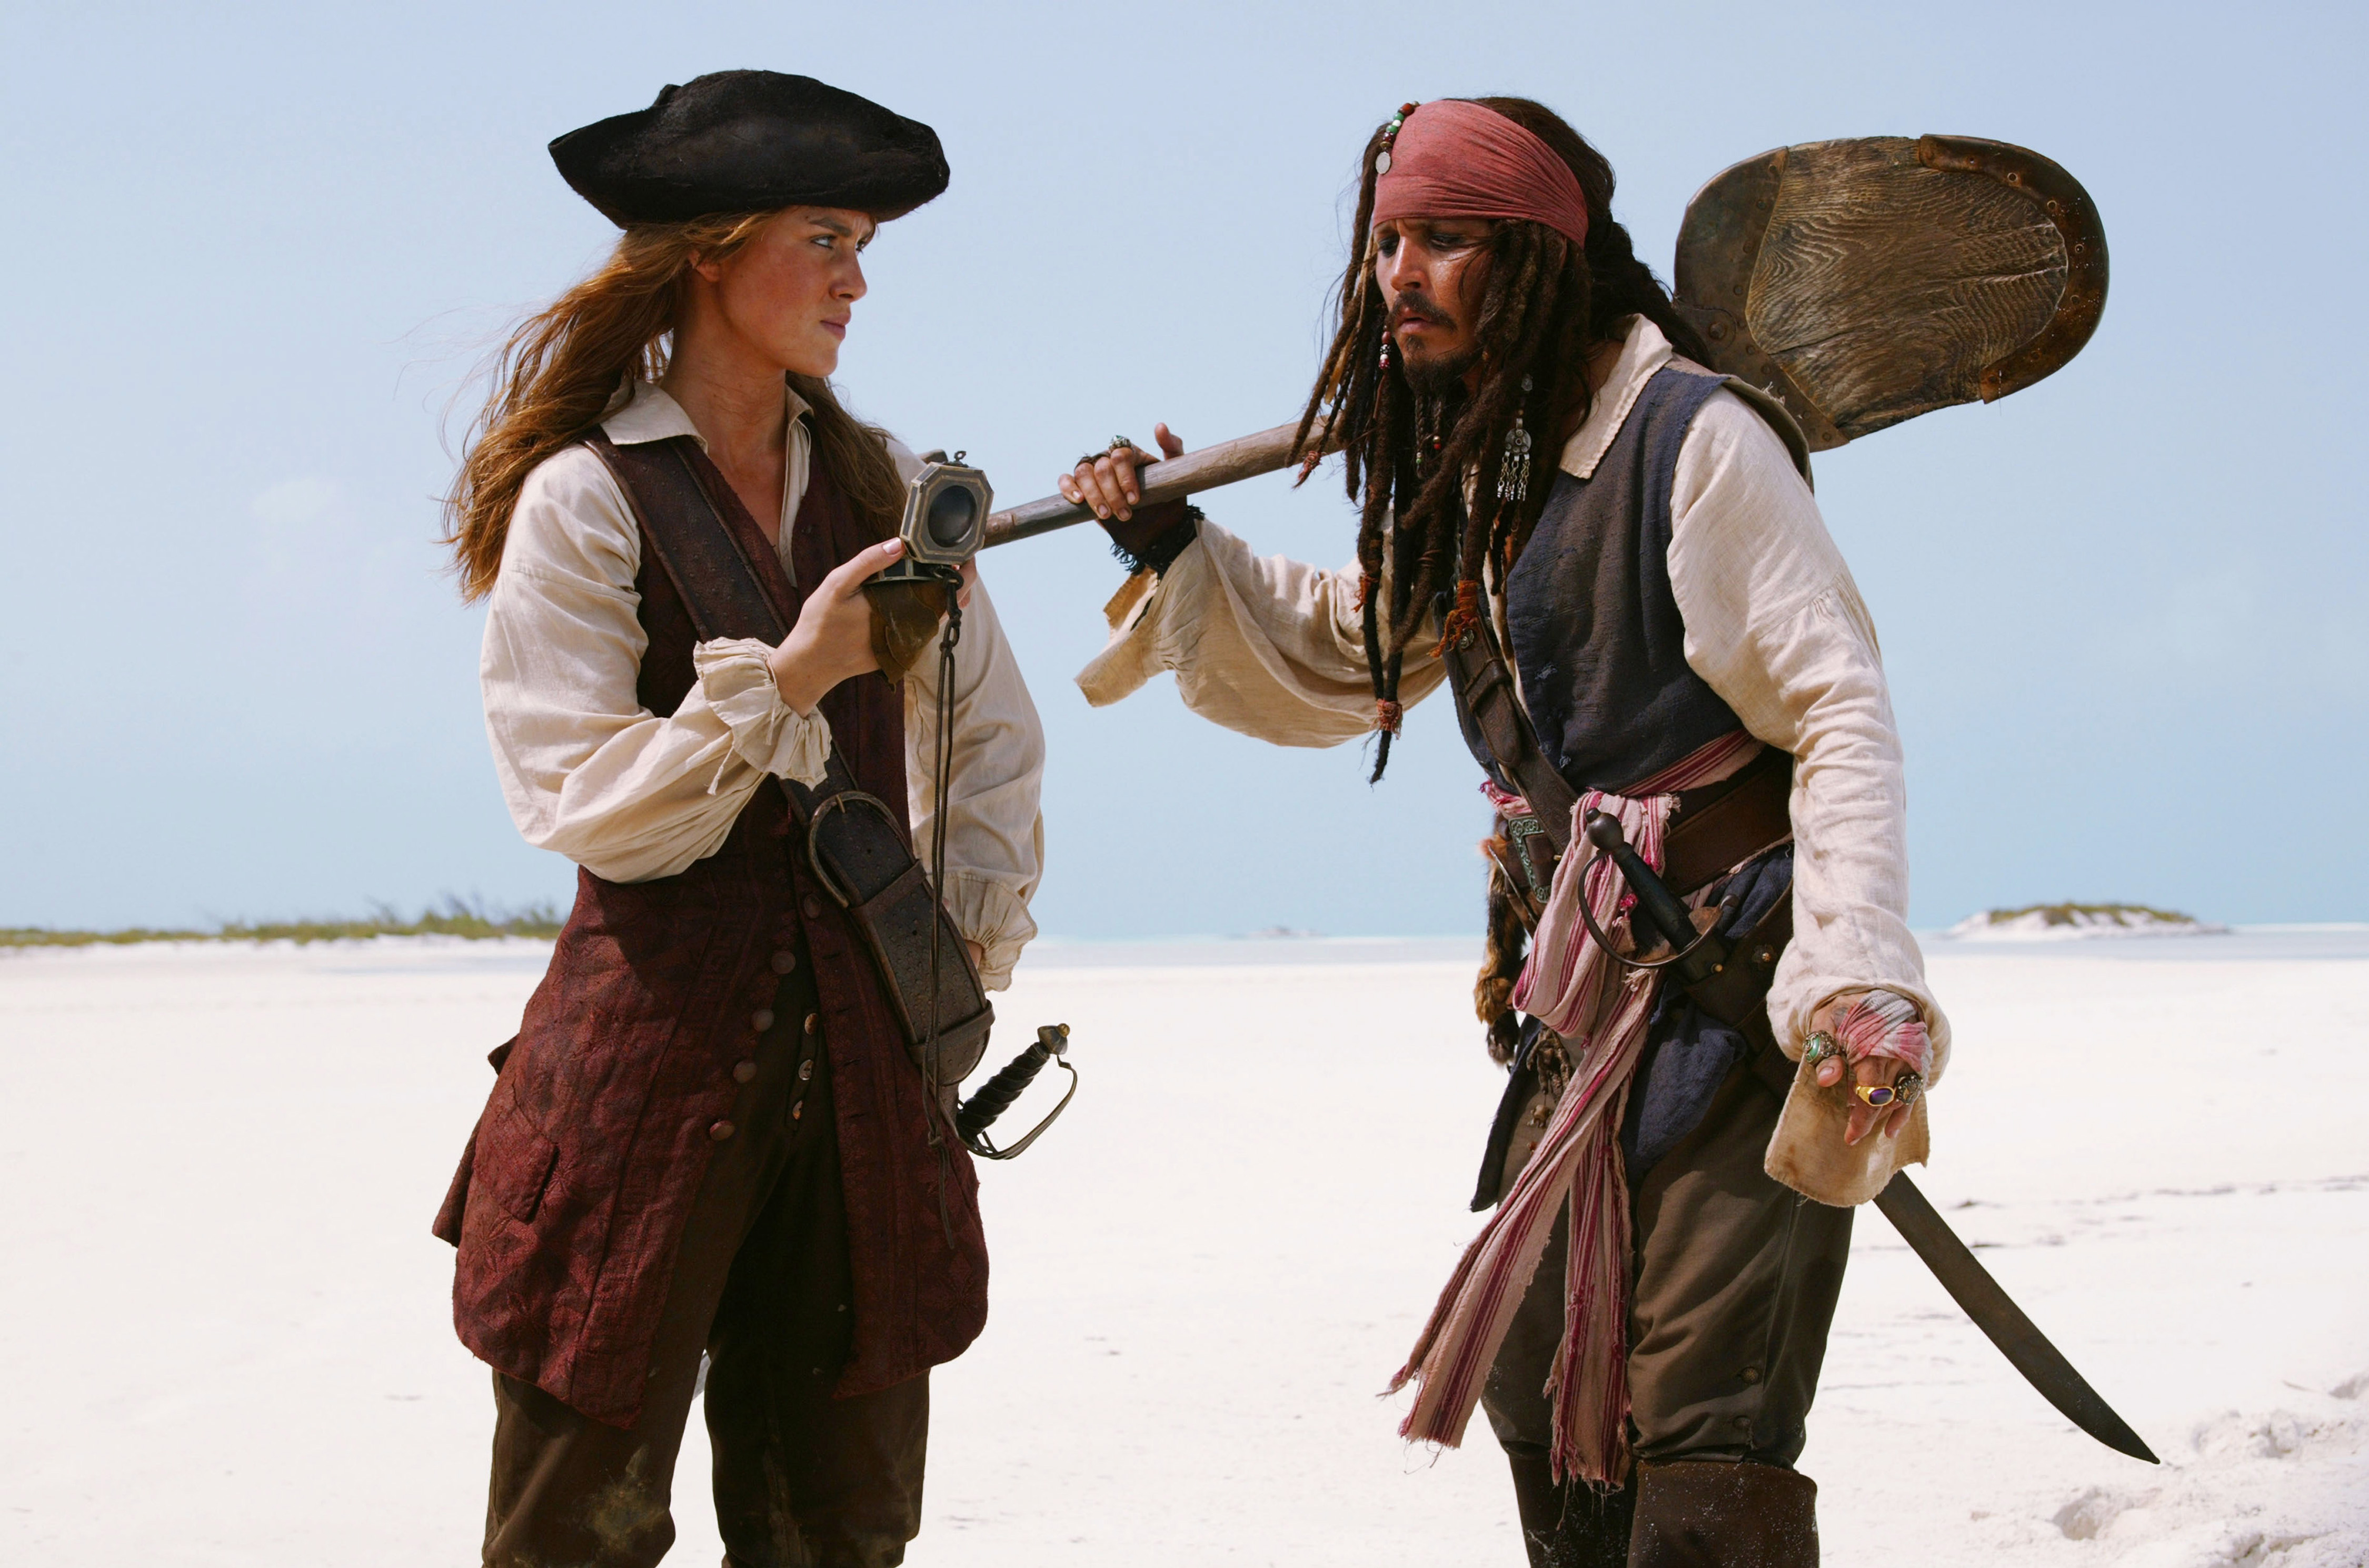 johnny depp, elizabeth swann, pirates of the caribbean, jack sparrow, keira knightley, movie, pirates of the caribbean: dead man's chest